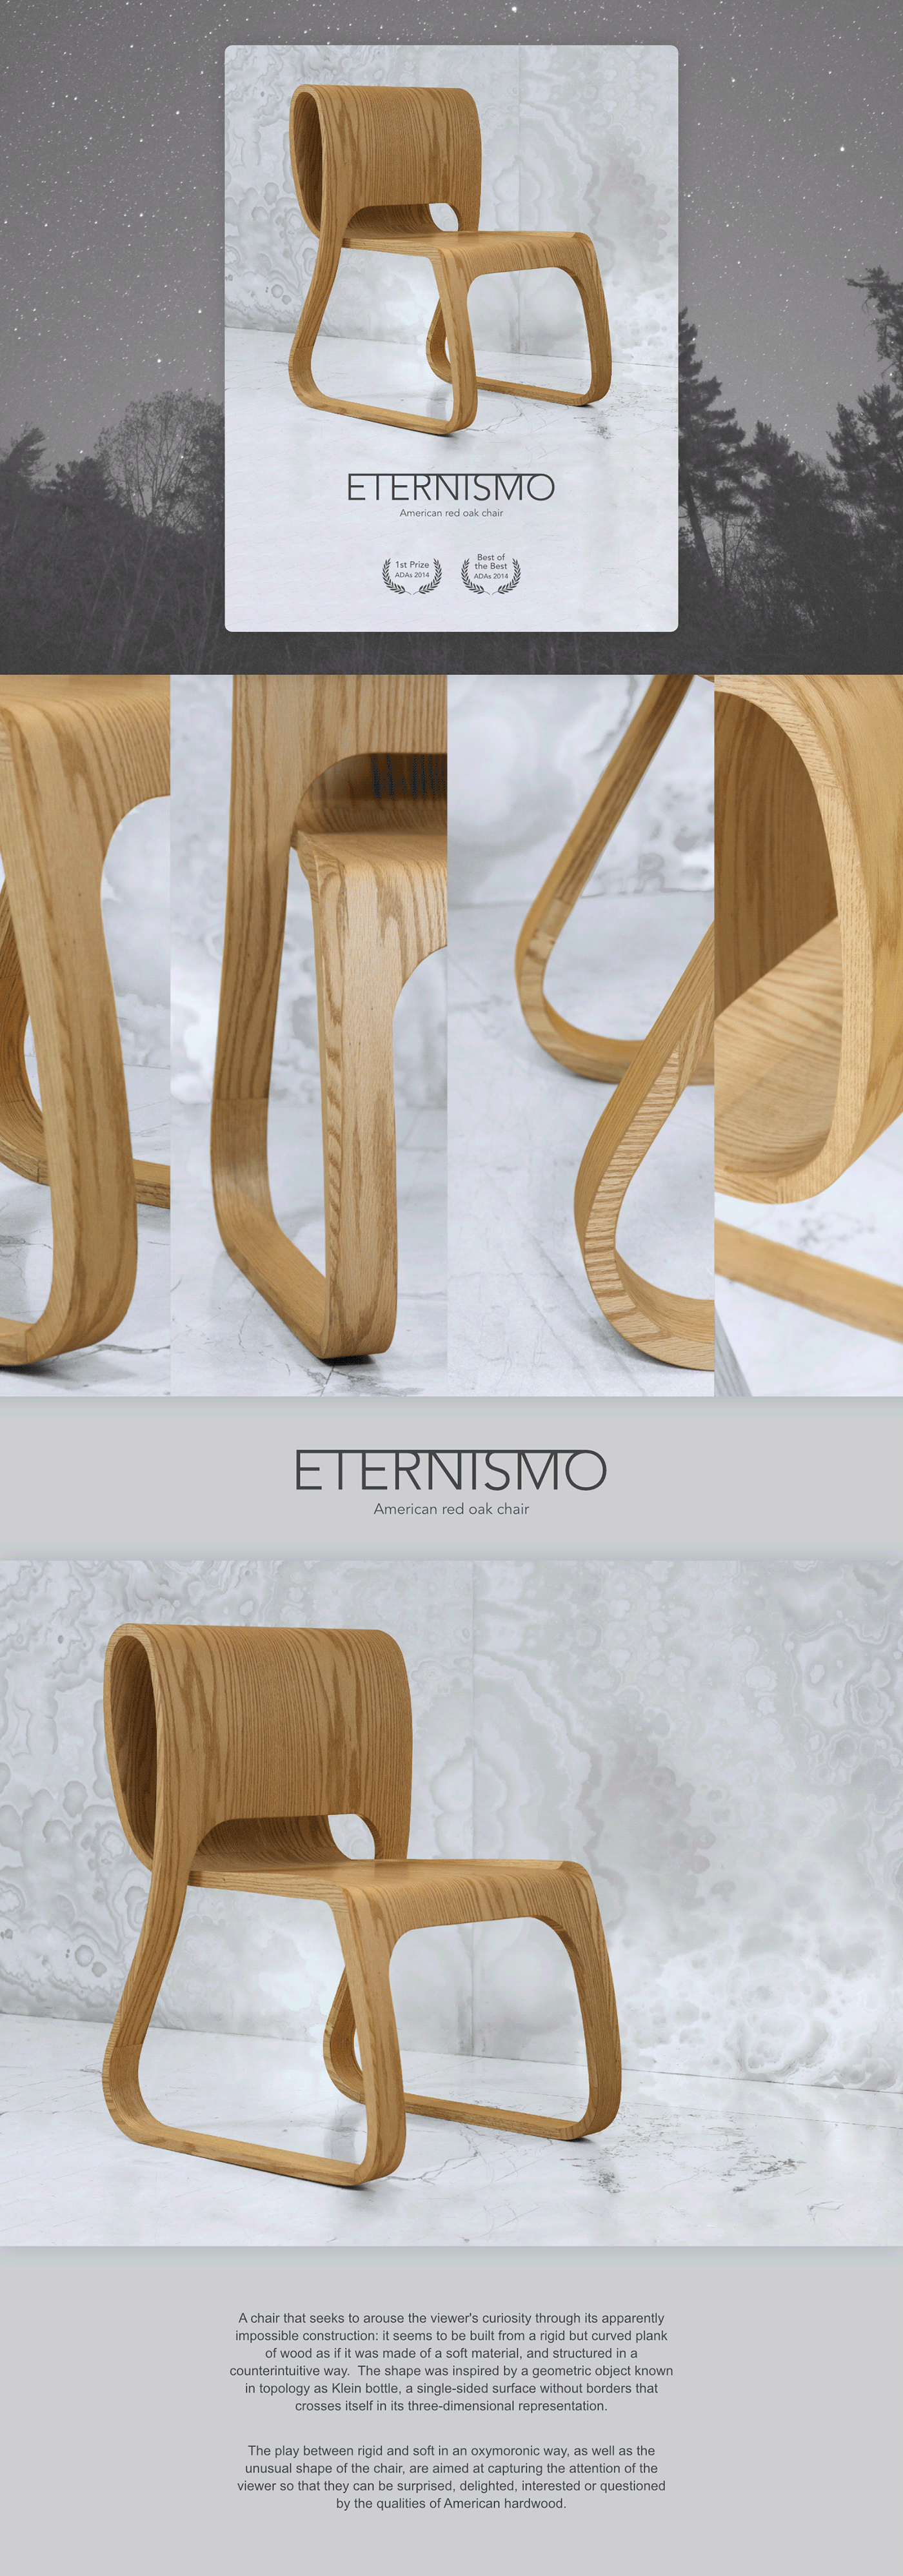 chair furniture Enernity infinity Klein bottle wood curved